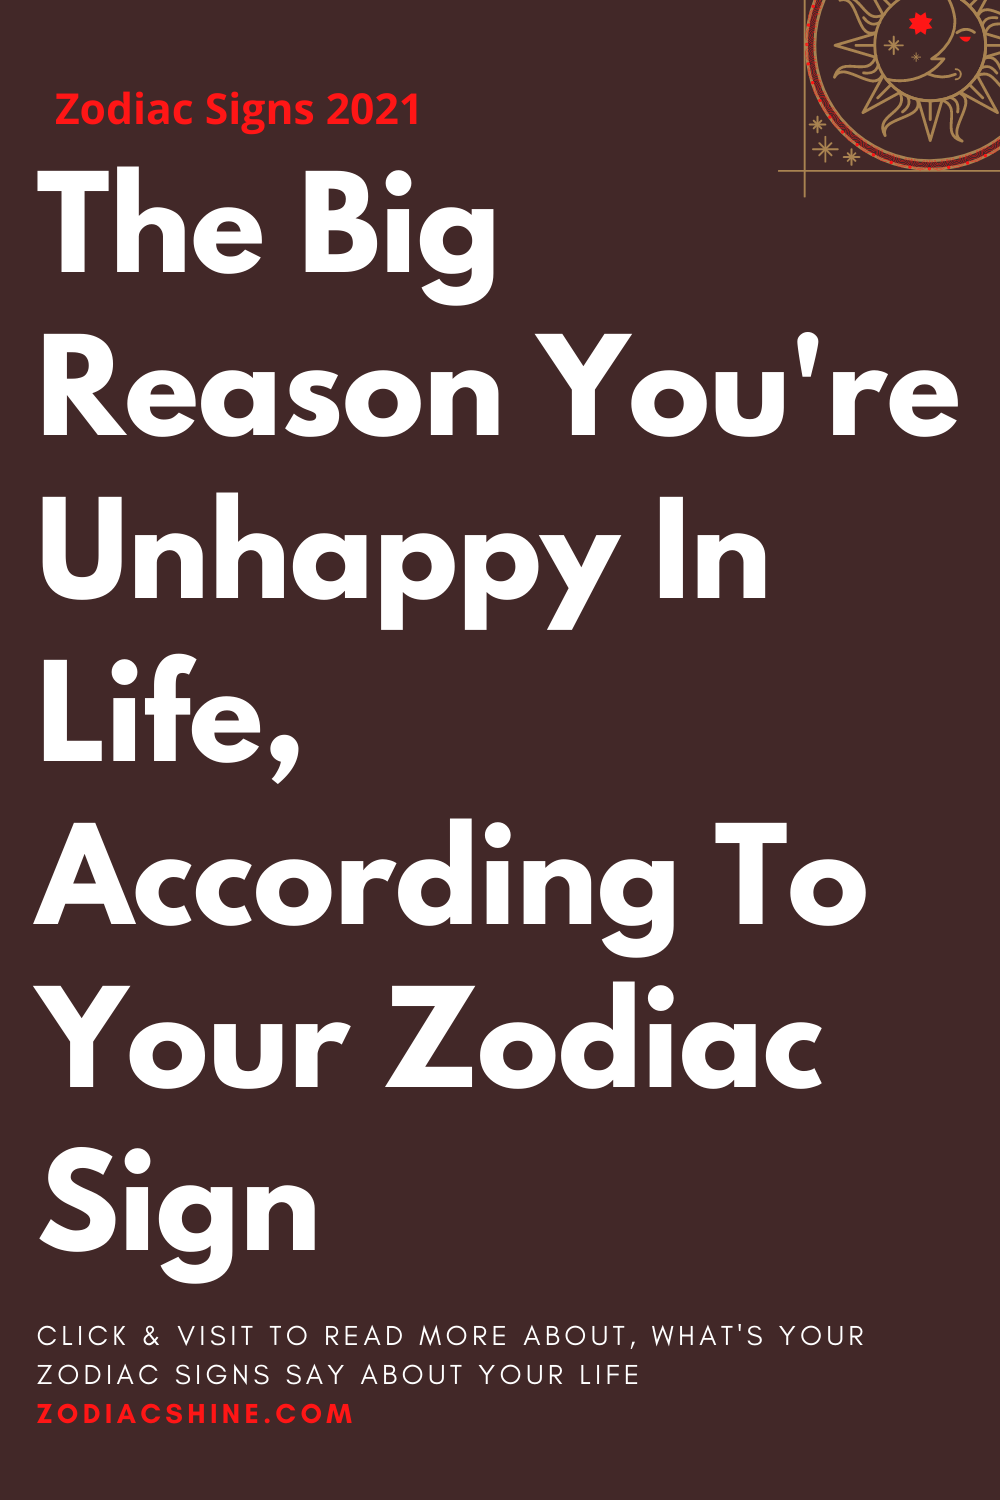 The Big Reason You're Unhappy In Life According To Your Zodiac Sign